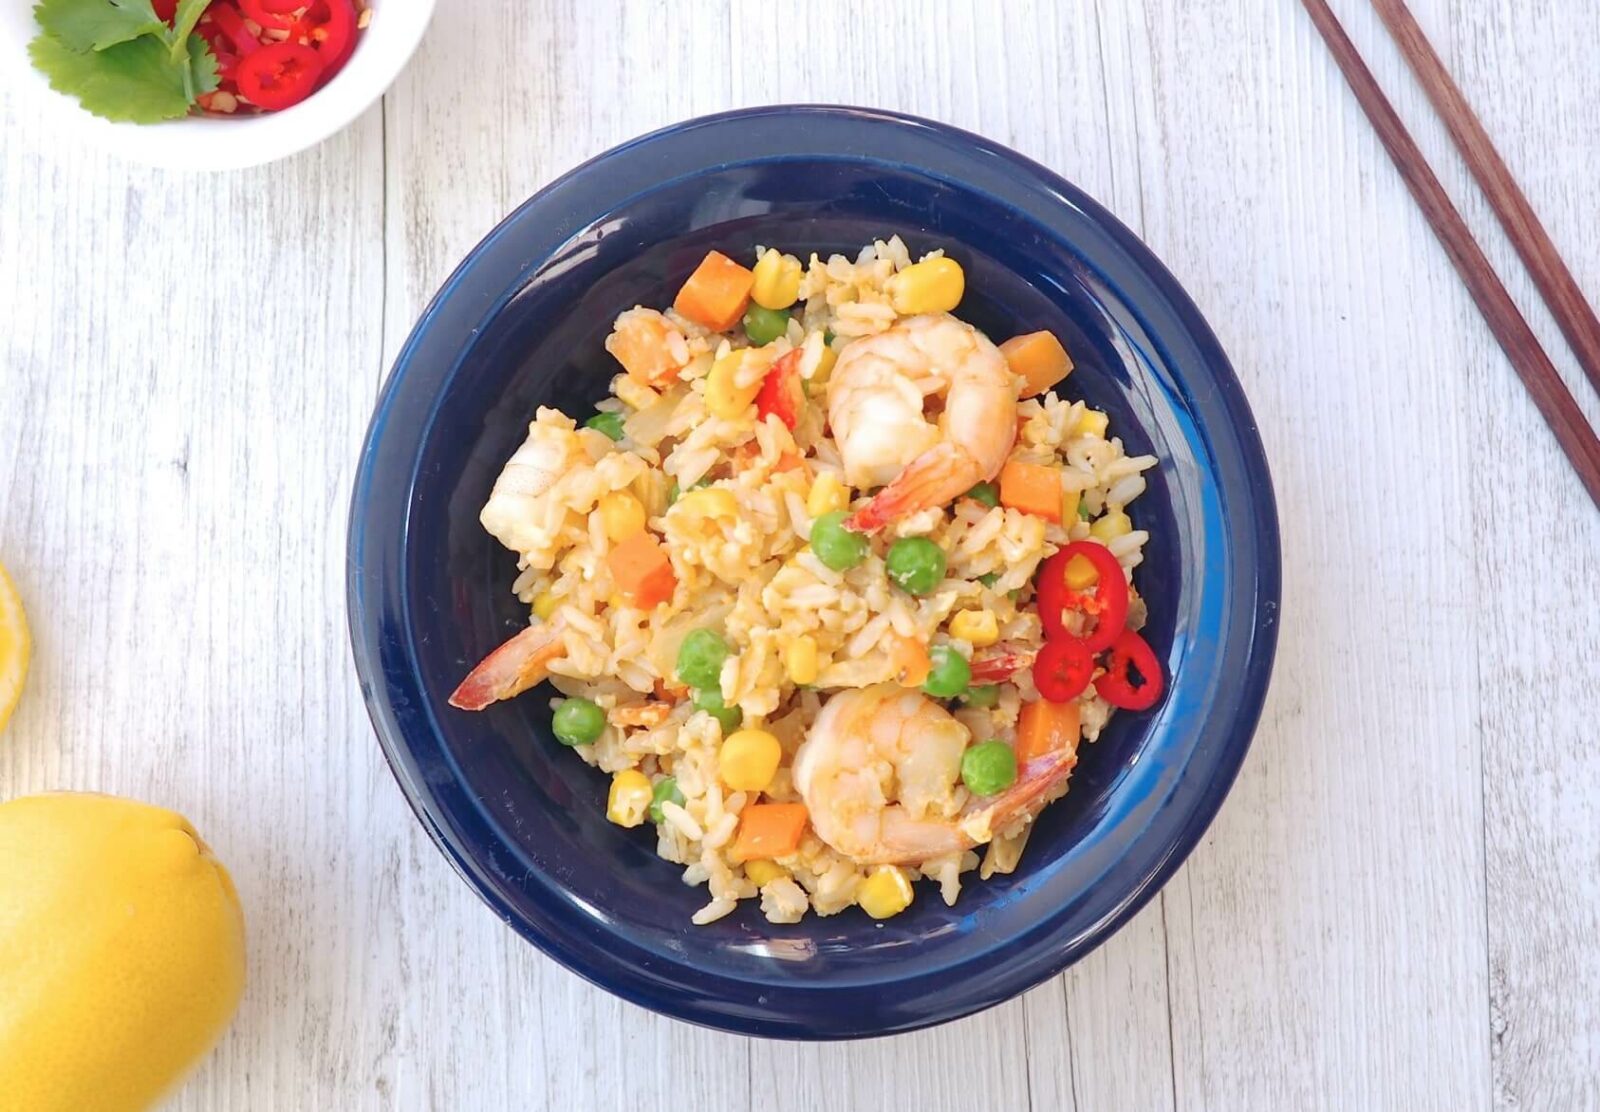 How to get energy while pregnant? Healthier fried rice - like this recipe from Back to Basics Pregnancy App - is an easy way to sneak in some veggies while keeping it plain and carb-based. Image: Lyndi Cohen